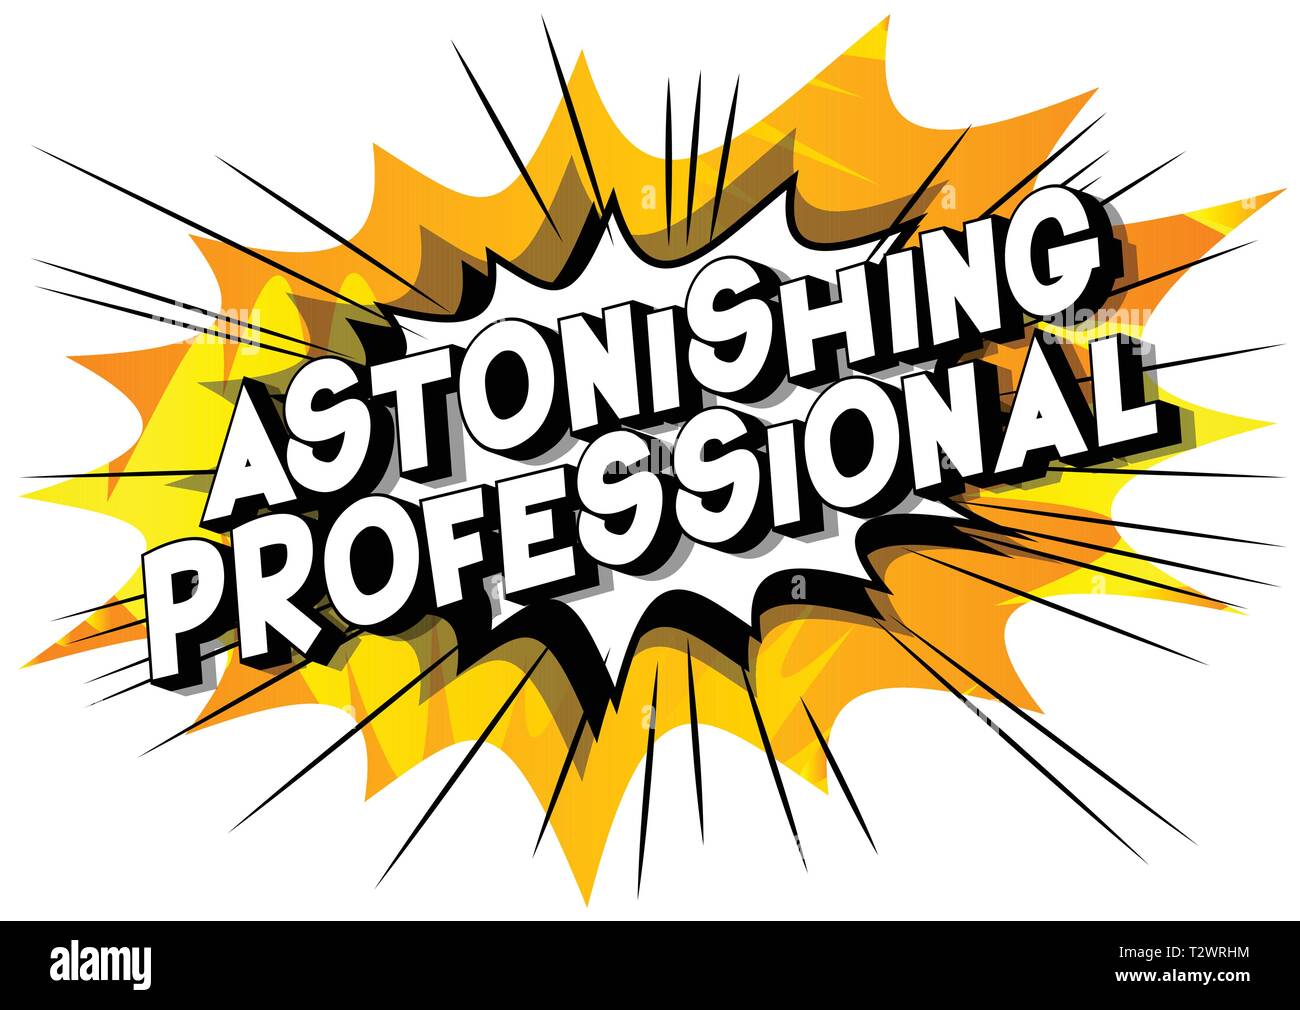 Astonishing Professional - Vector illustrated comic book style phrase on abstract background. Stock Vector